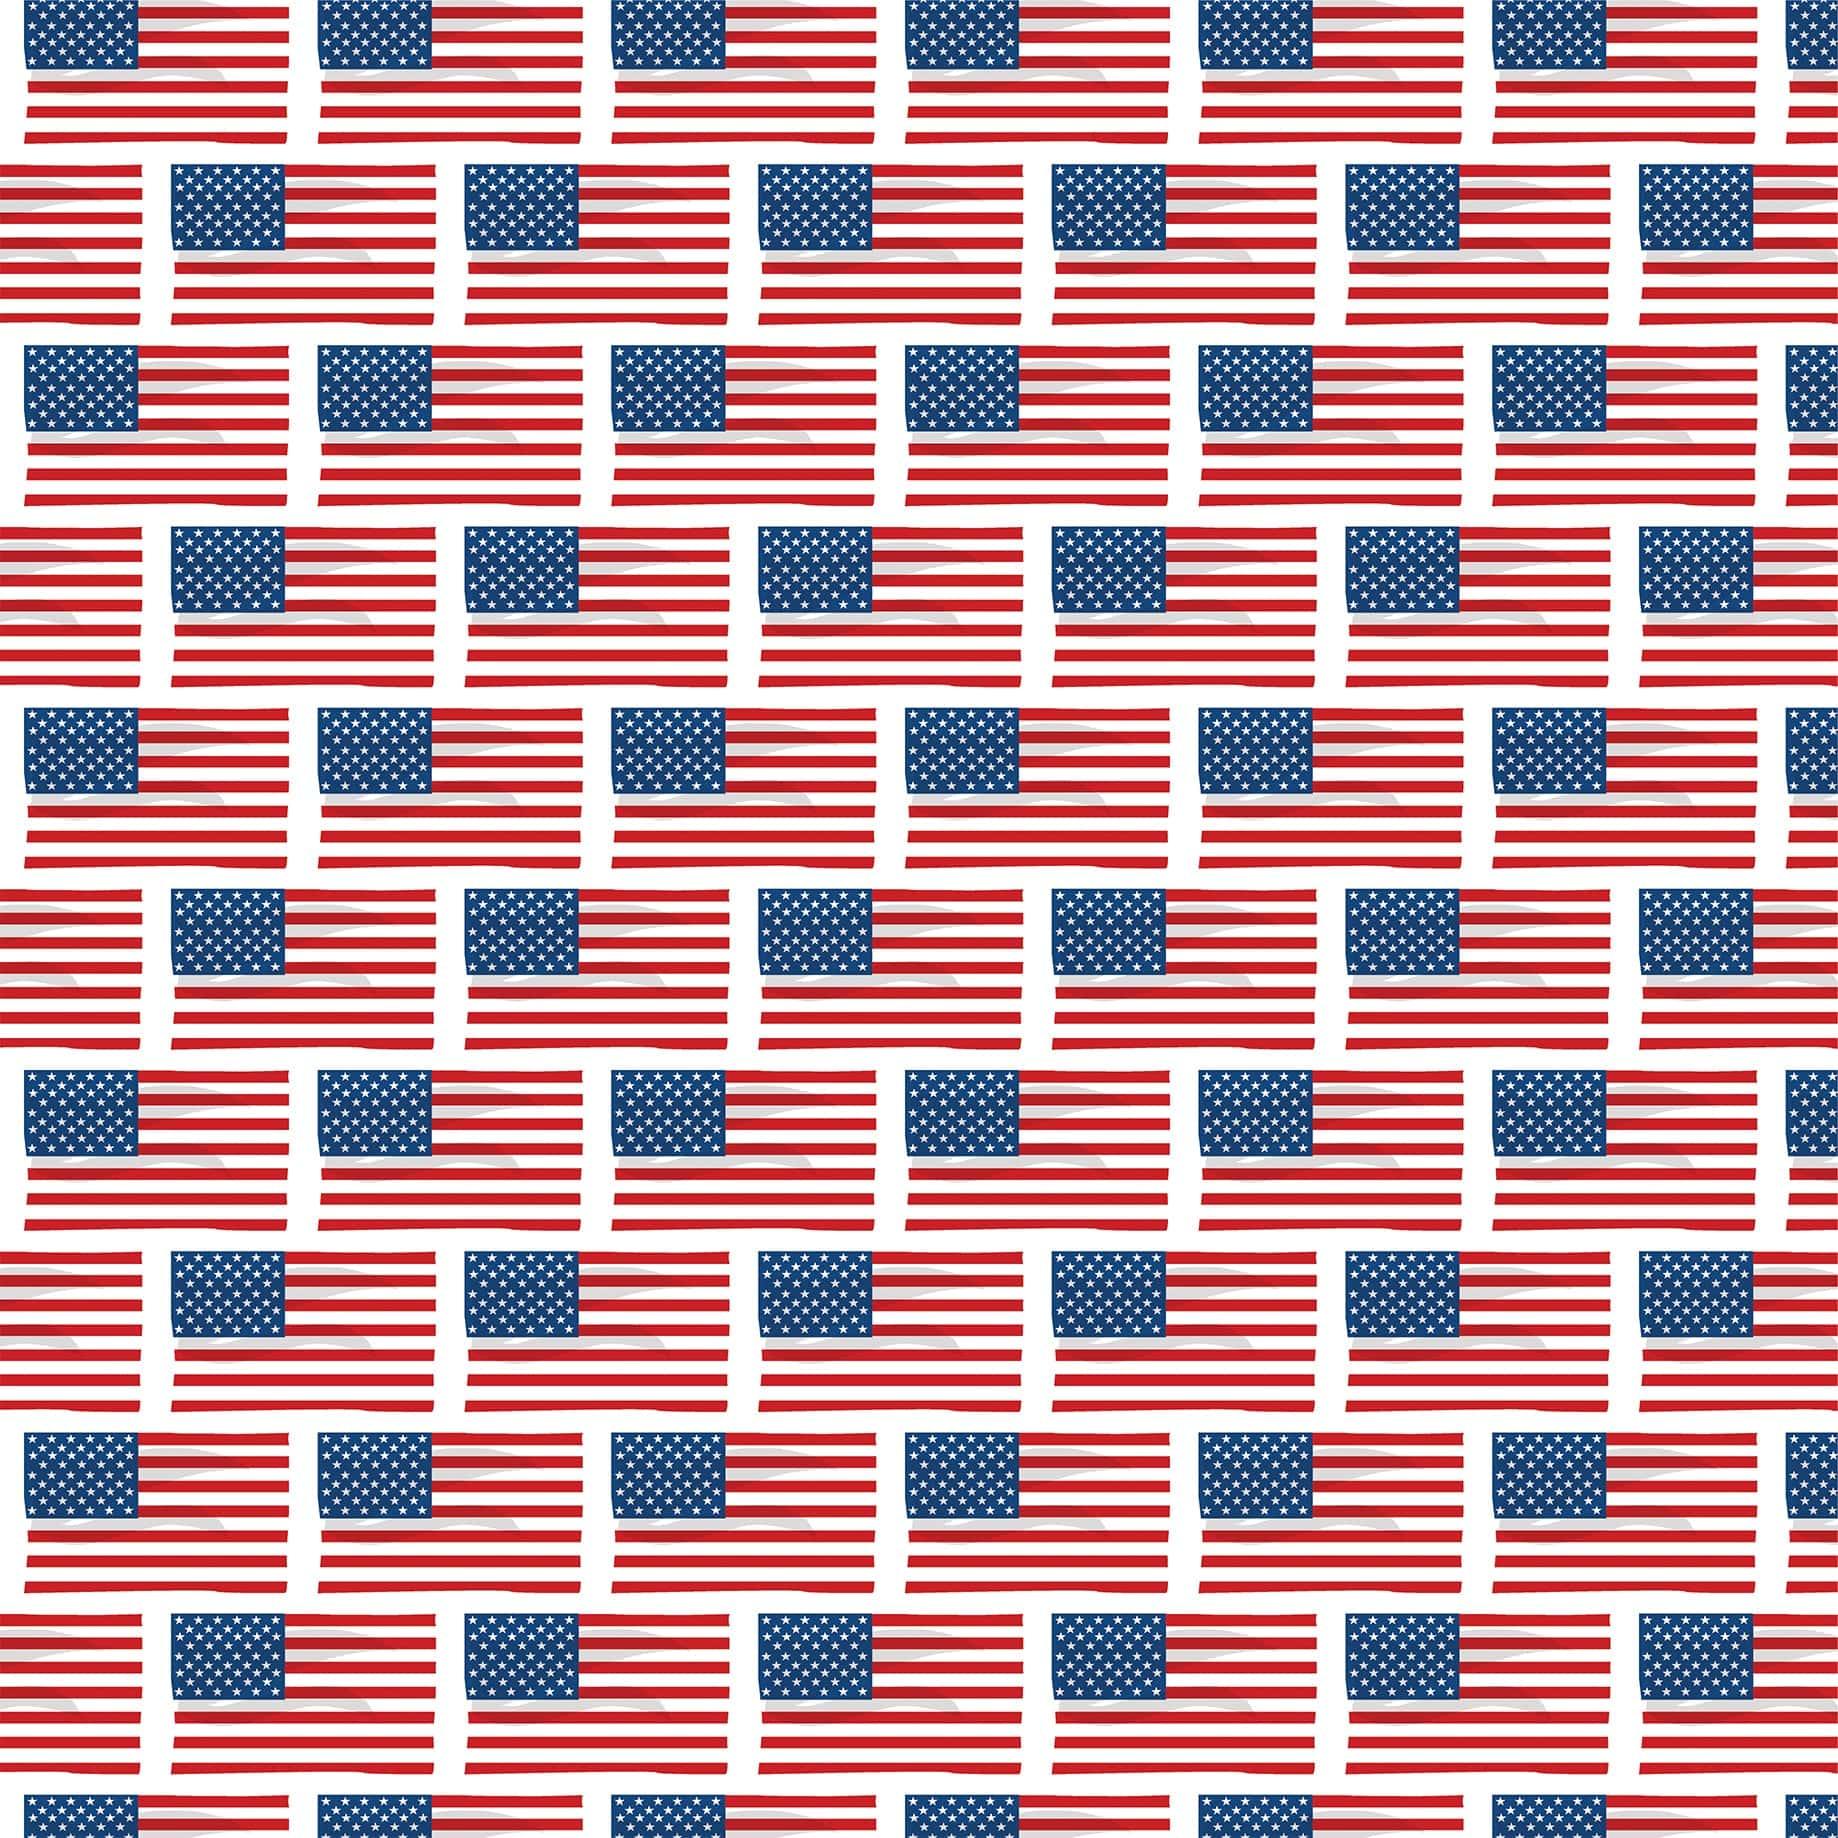 God Bless America Collection Flying Flags 12 x 12 Double-Sided Scrapbook Paper by Carta Bella - Scrapbook Supply Companies